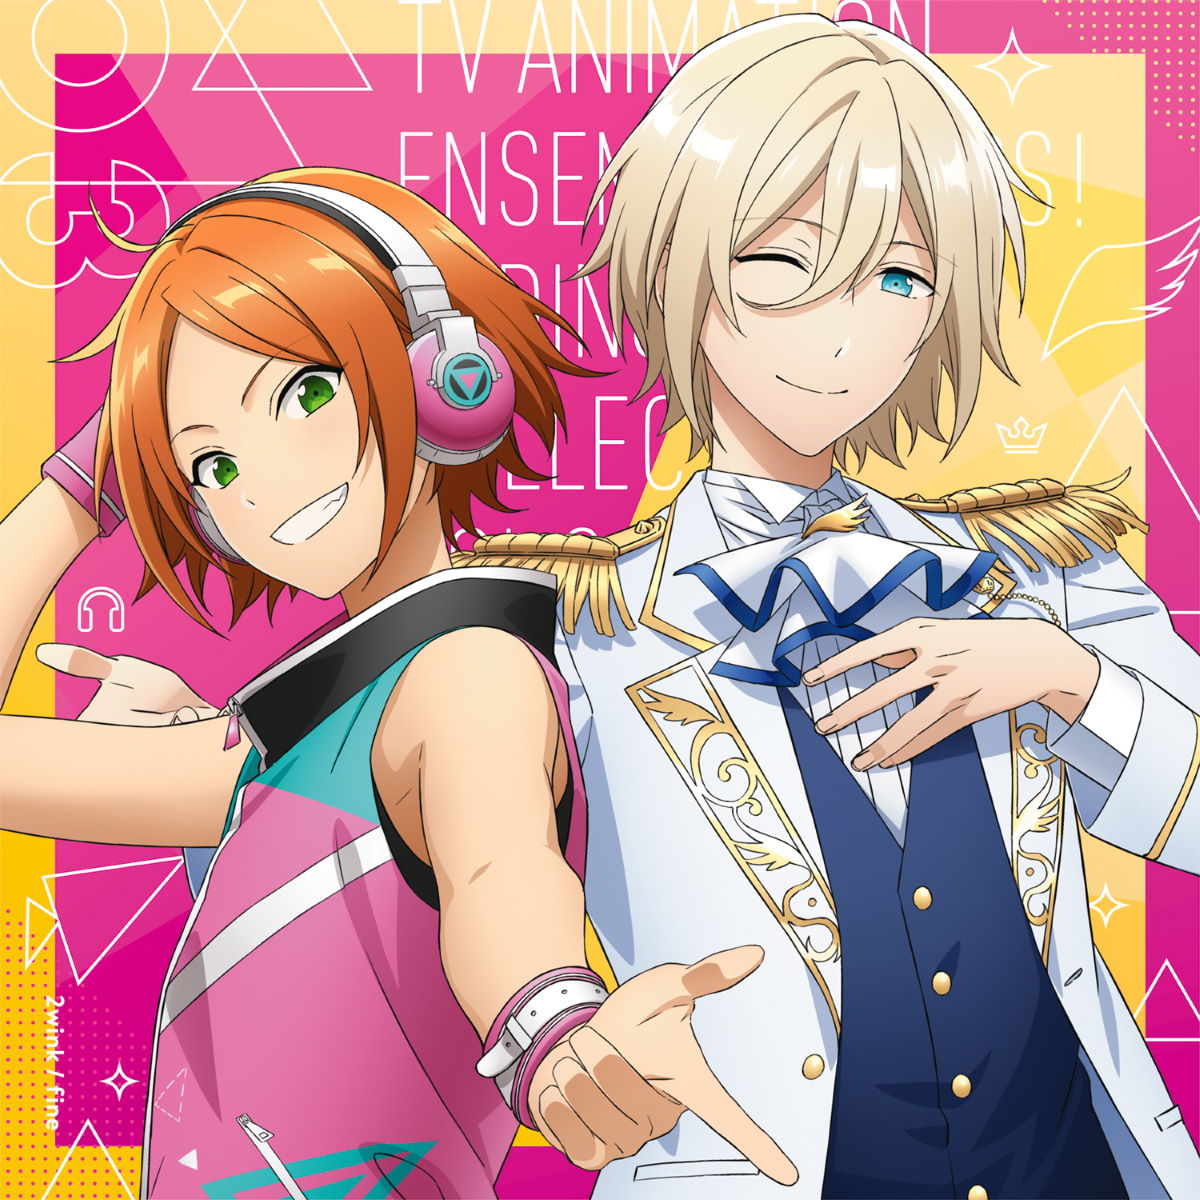 Cover for『fine - Hajimari no Fantasia』from the release『Ensemble Stars! Ending Theme Song Collection vol.3』